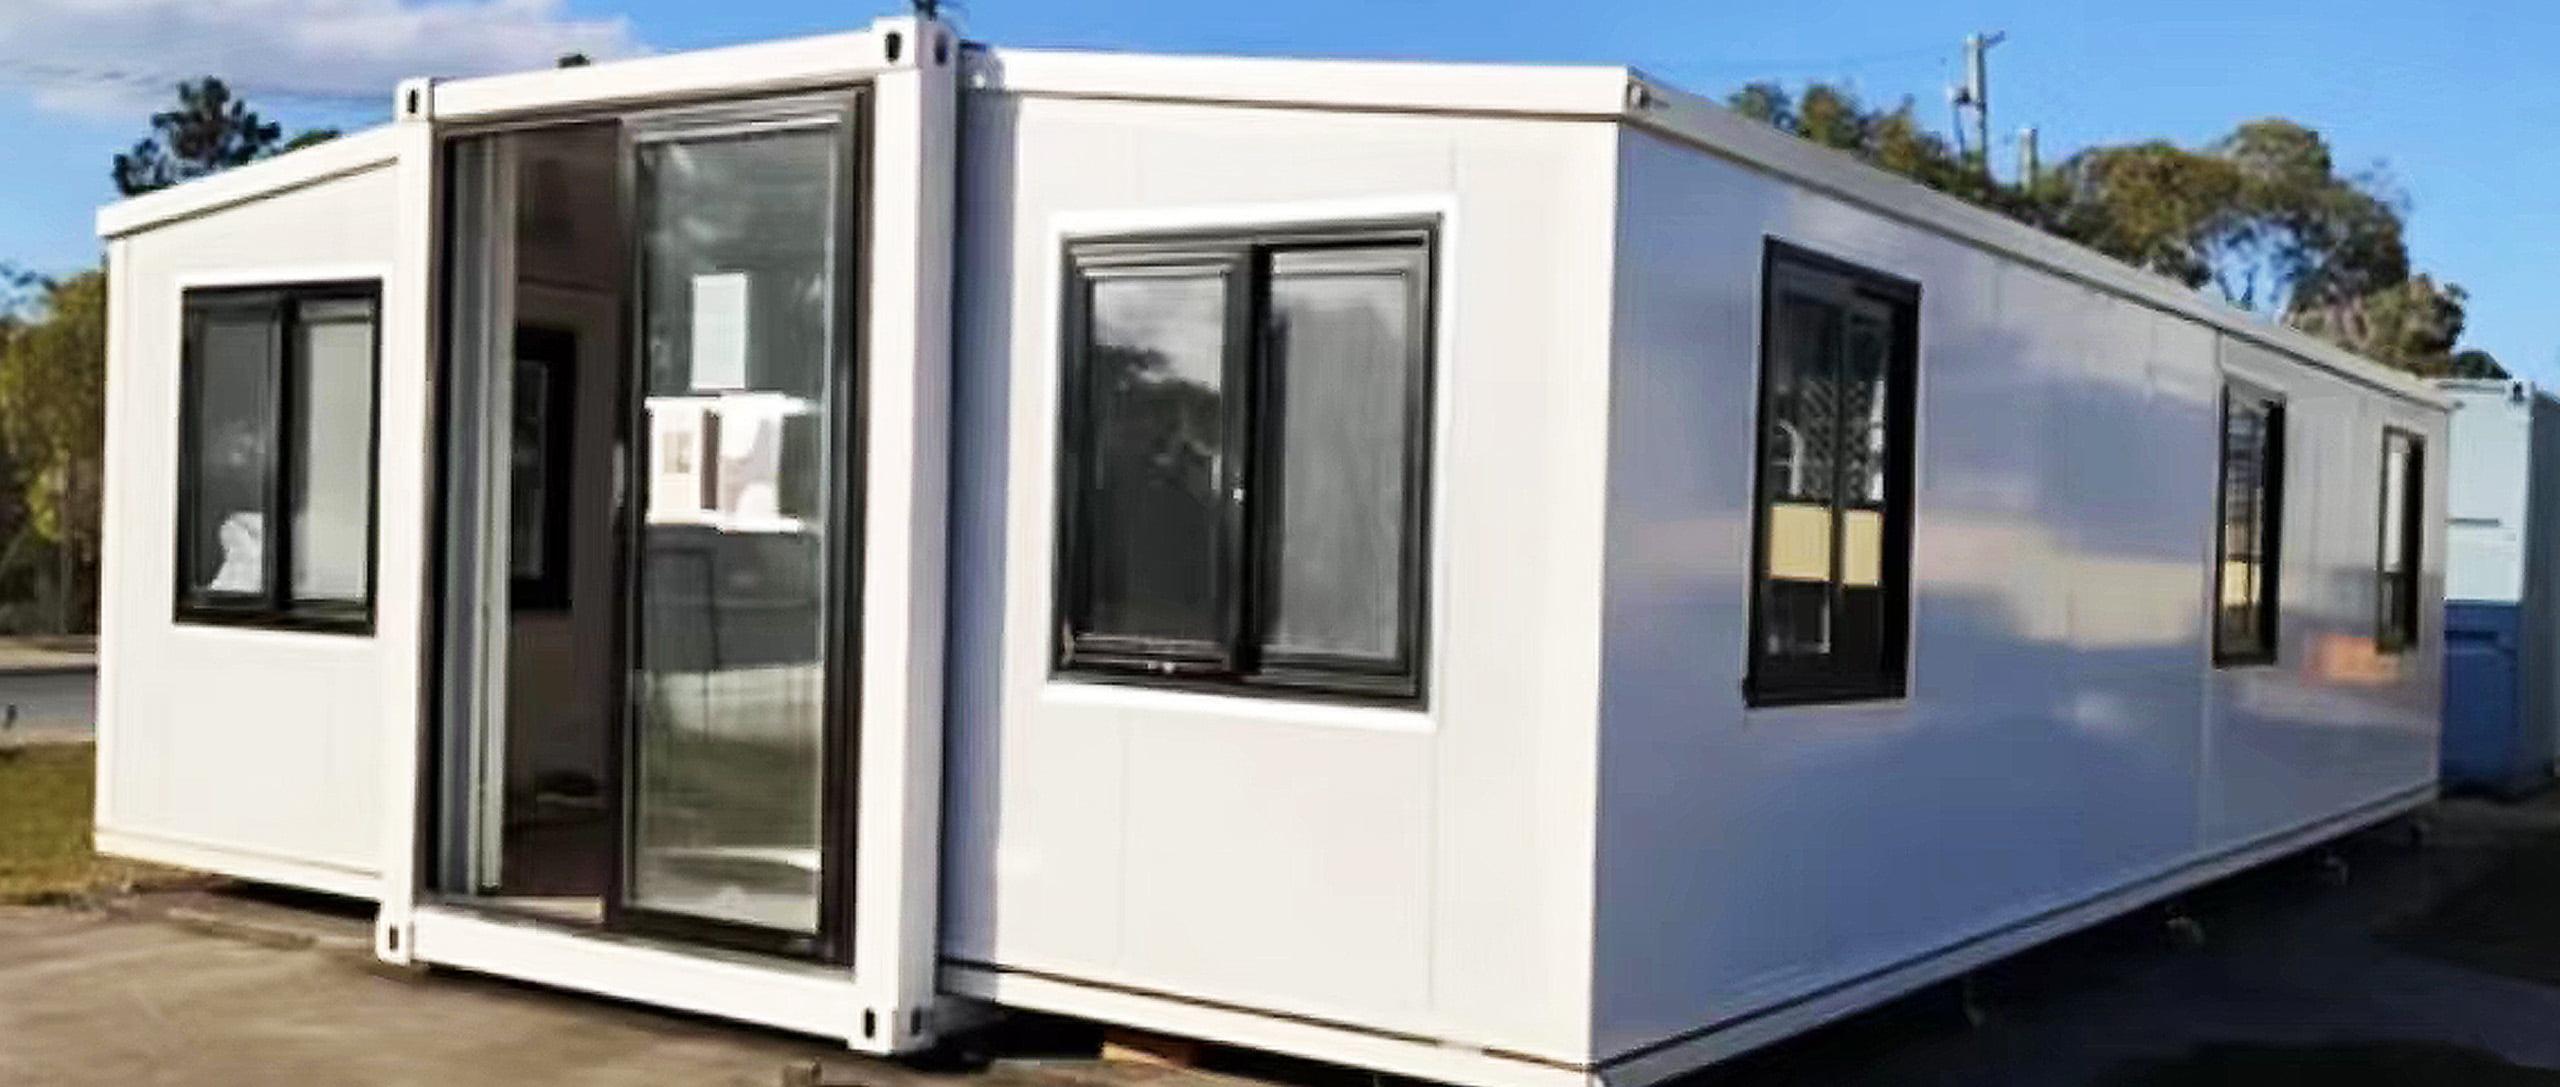 PGH 30ft Portable Home Large 